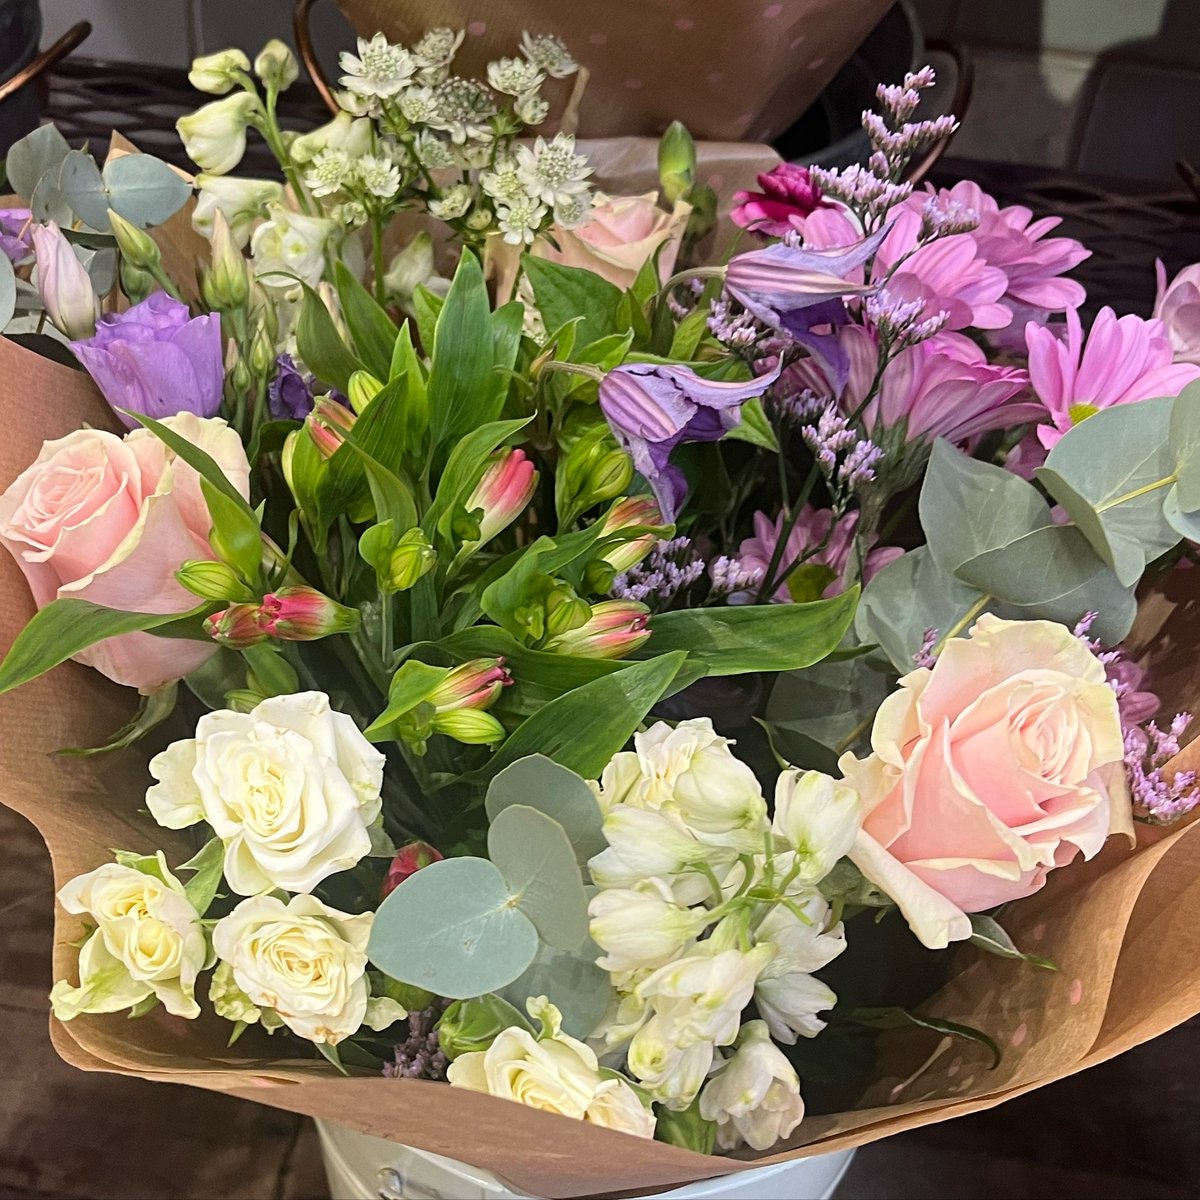 Did you know The Secret Garden offer a flower subscription service? You can get fresh bouquets delivered to your door (or send to a loved one) weekly or monthly, and save 5% too. Check out their website or pop in and see the friendly team in Angel Gate! secretgardenguildford.co.uk/flowers-for-ho…